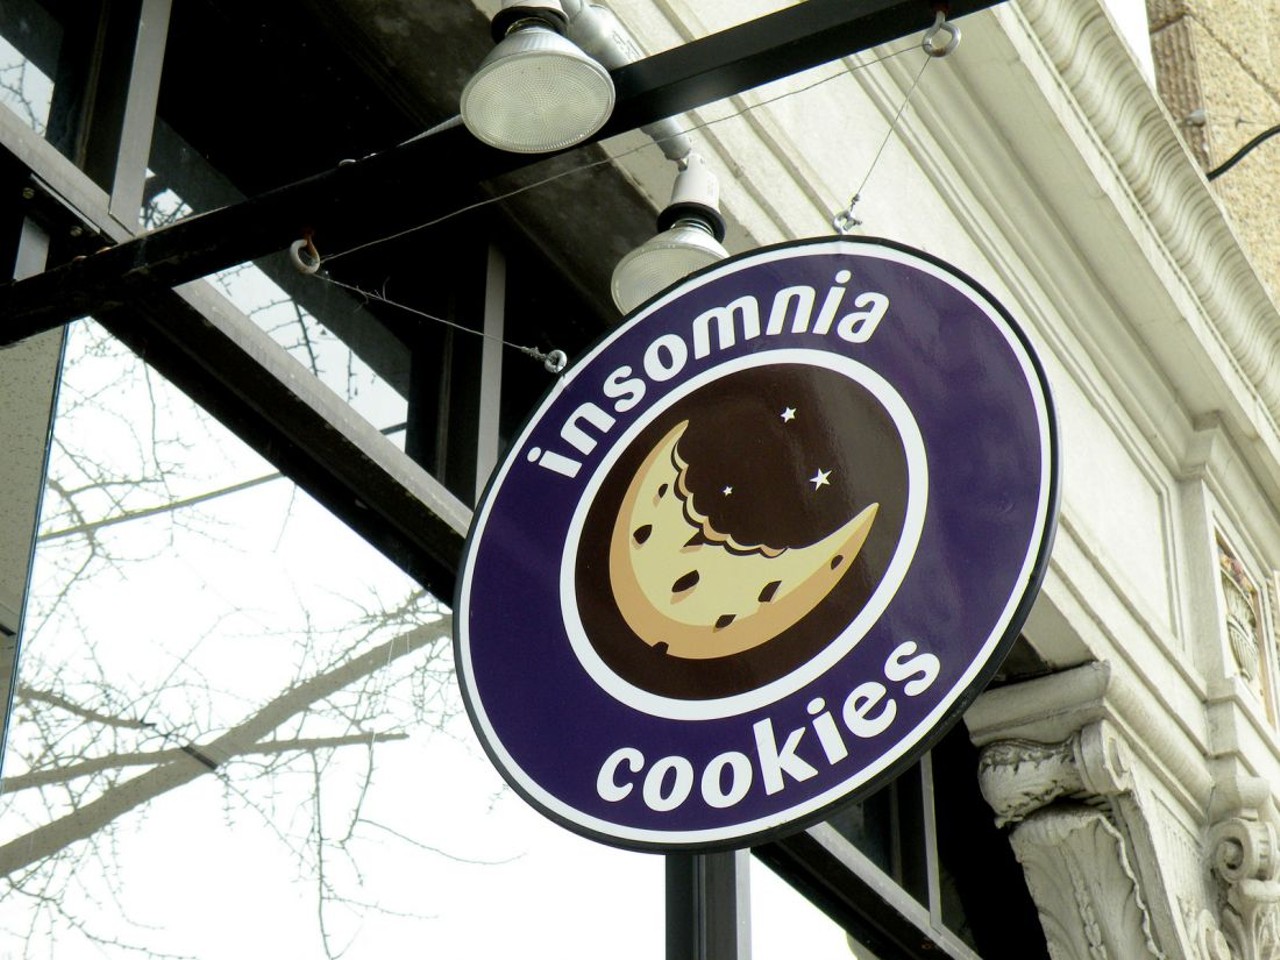  Insomnia Cookies 
Multiple locations
This specialty (chain) store bakes a variety of cookies just begging for you to take them home. The store also deliver every day until 3 a.m. If you&#146;re up for the late night/hella early cookie run on a Friday or Saturday, the store is open until 4 a.m.
Photo via Jenn Miller/flickr